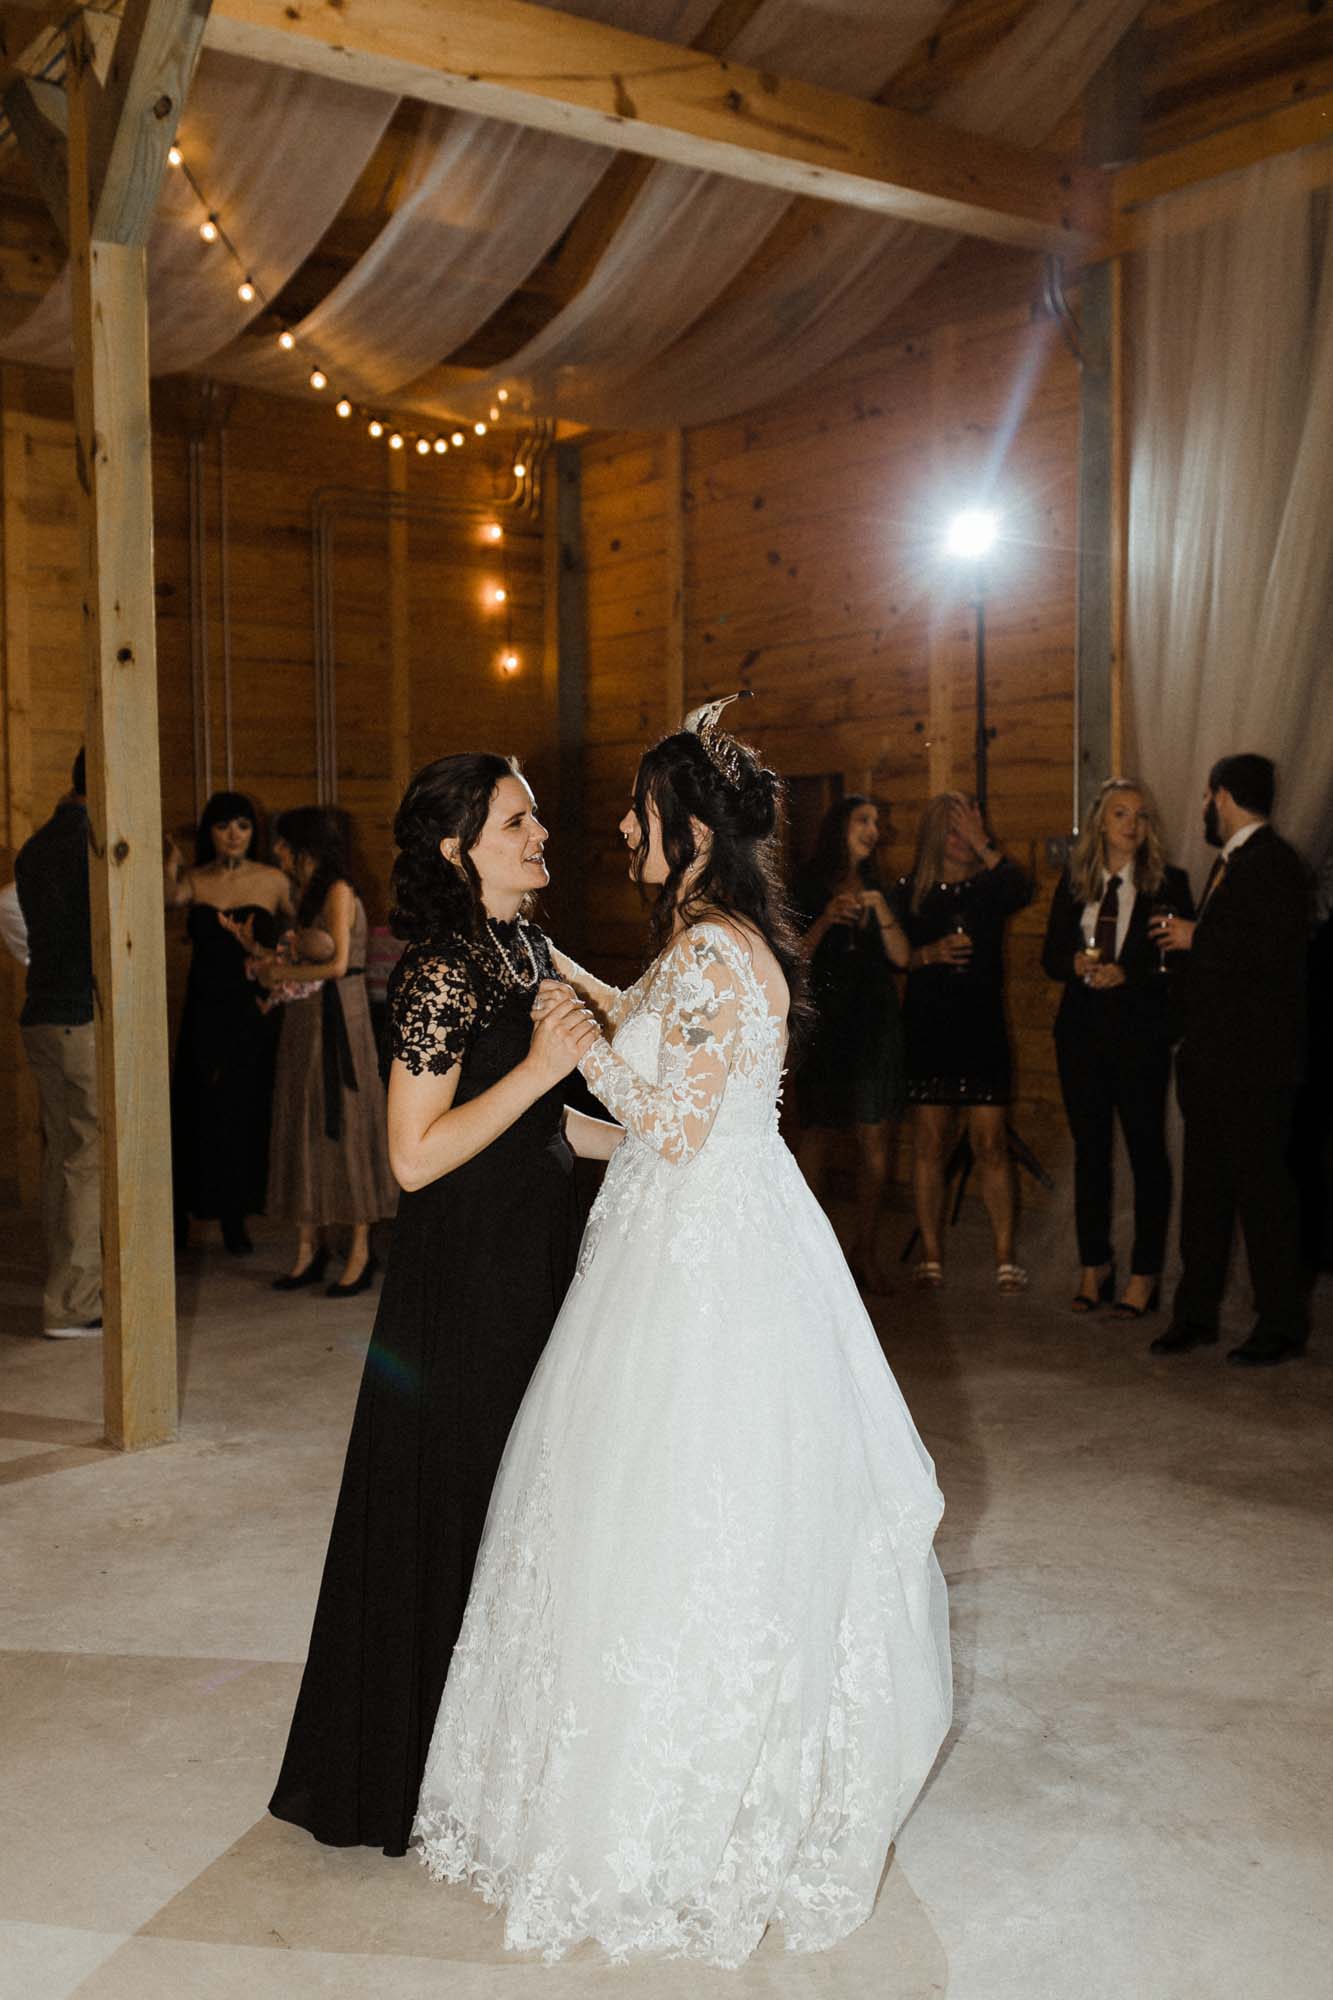 Beautifully gothic Texas wedding with creative details, photo by Leah Thomason Photography, featured on Equally Wed, the LGBTQ+ wedding magazine barn outdoor wedding reception